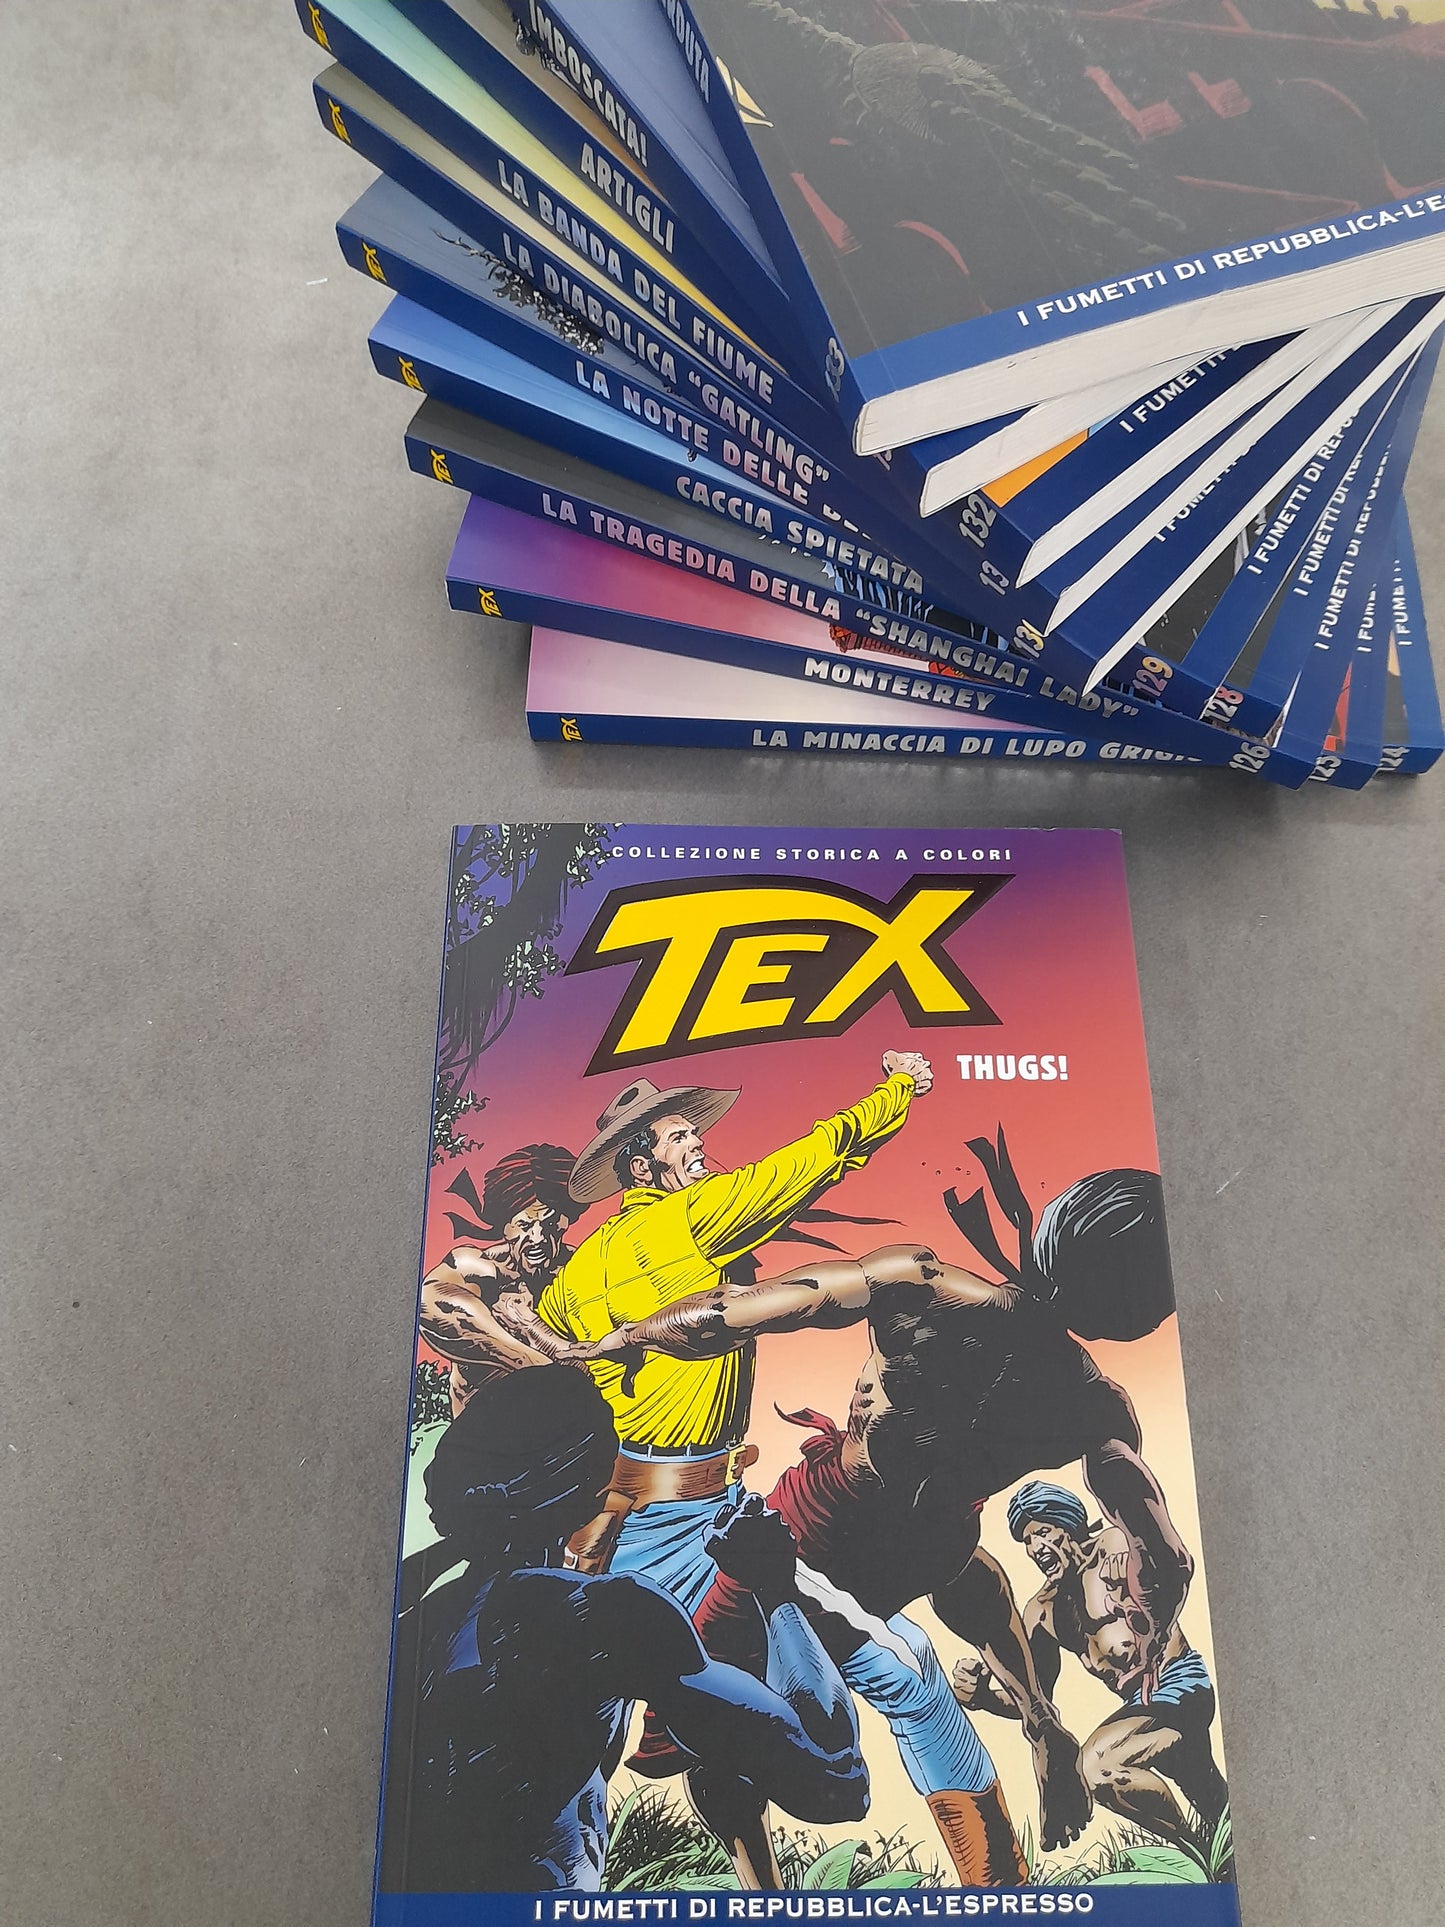 TEX WILLER n. 127 Thugs! - Collezione storica